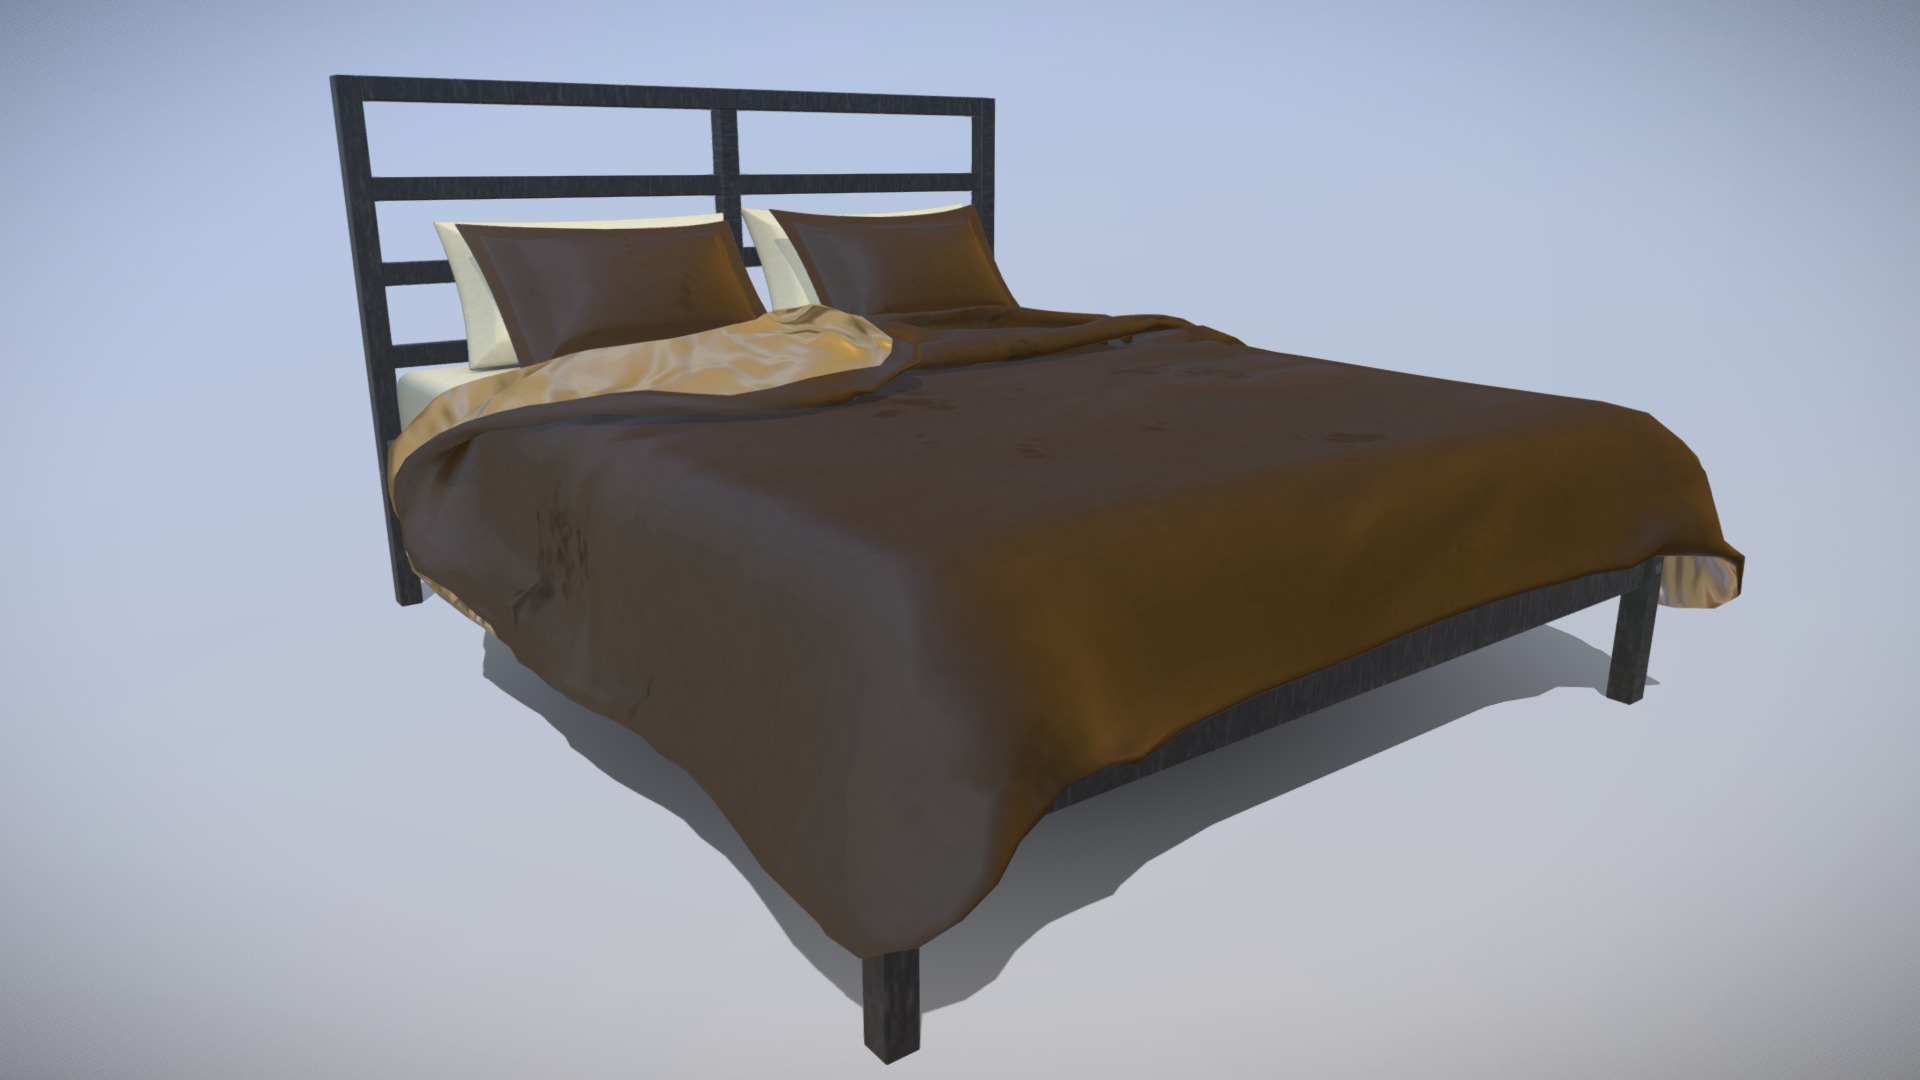 3D model Bed Low Poly VR AR PBR Materials - This is a 3D model of the Bed Low Poly VR AR PBR Materials. The 3D model is about a bed with a cover.